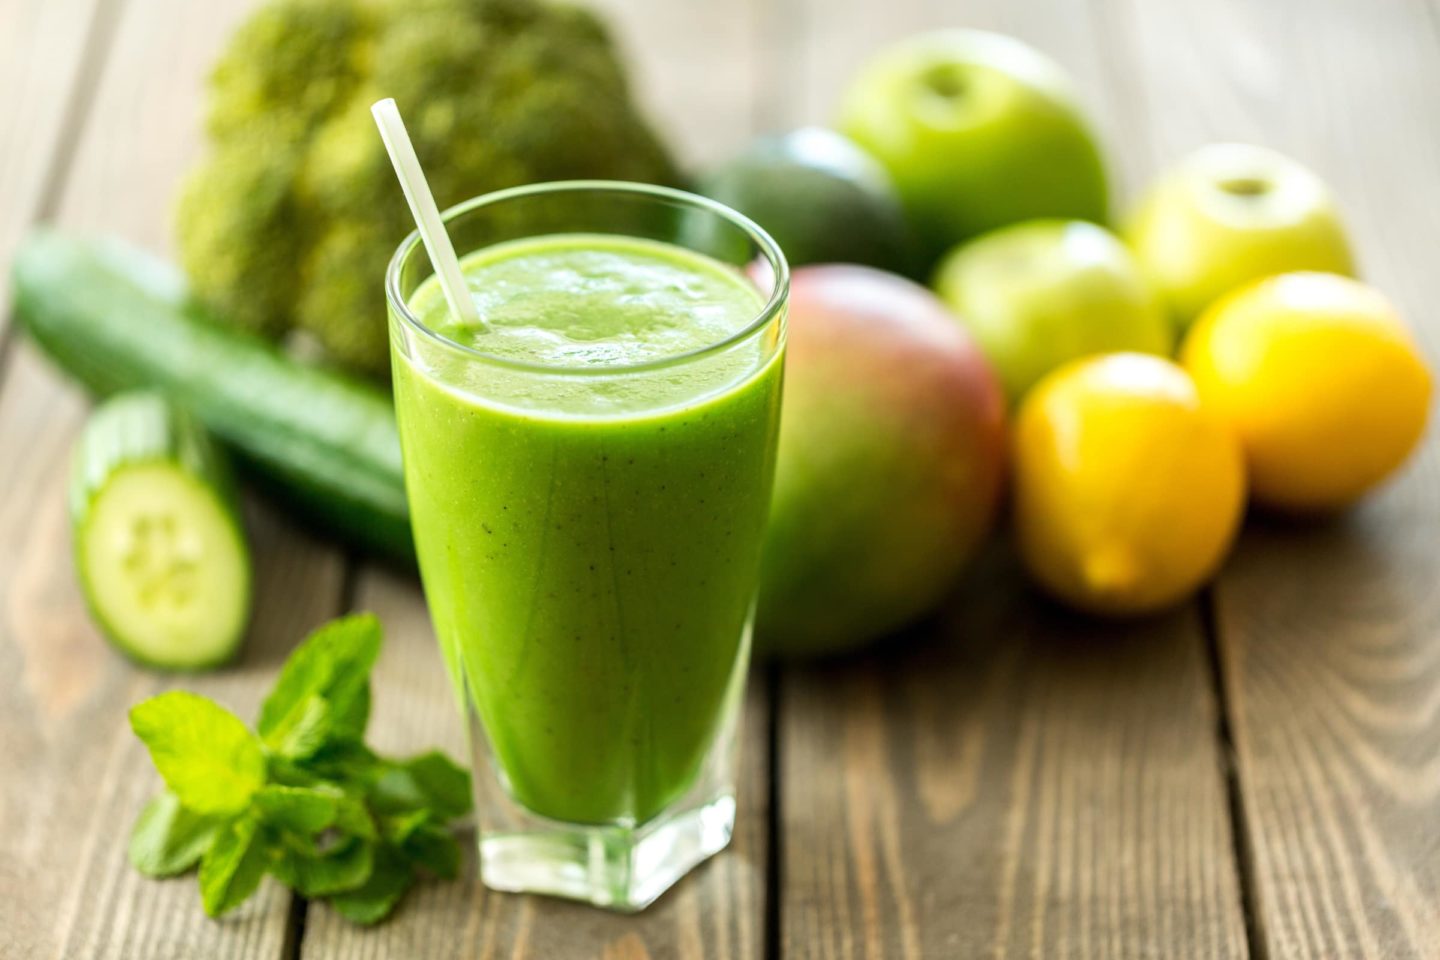 Green Juice From Fruits And Veggies